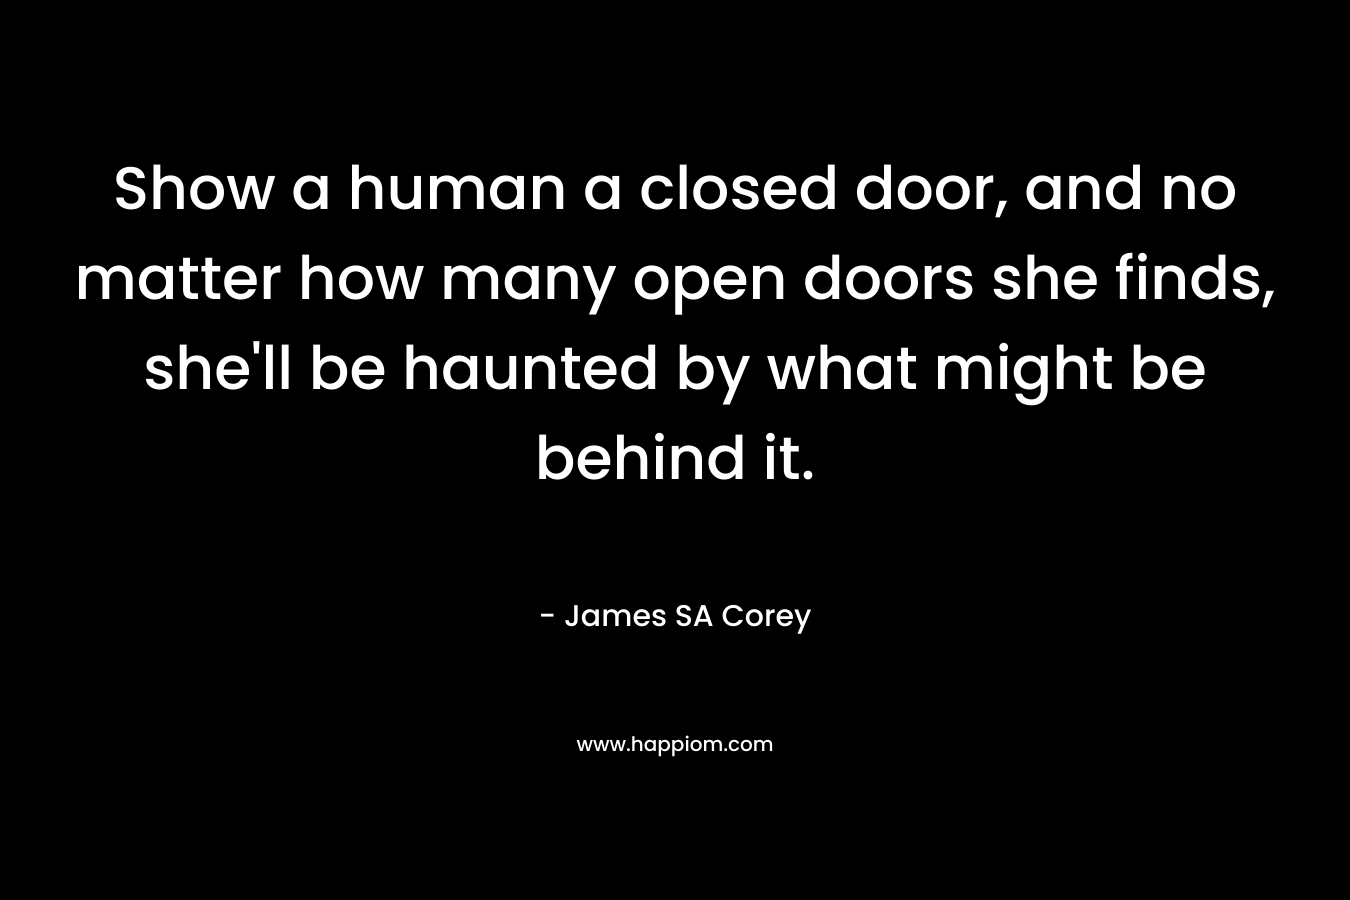 Show a human a closed door, and no matter how many open doors she finds, she'll be haunted by what might be behind it.